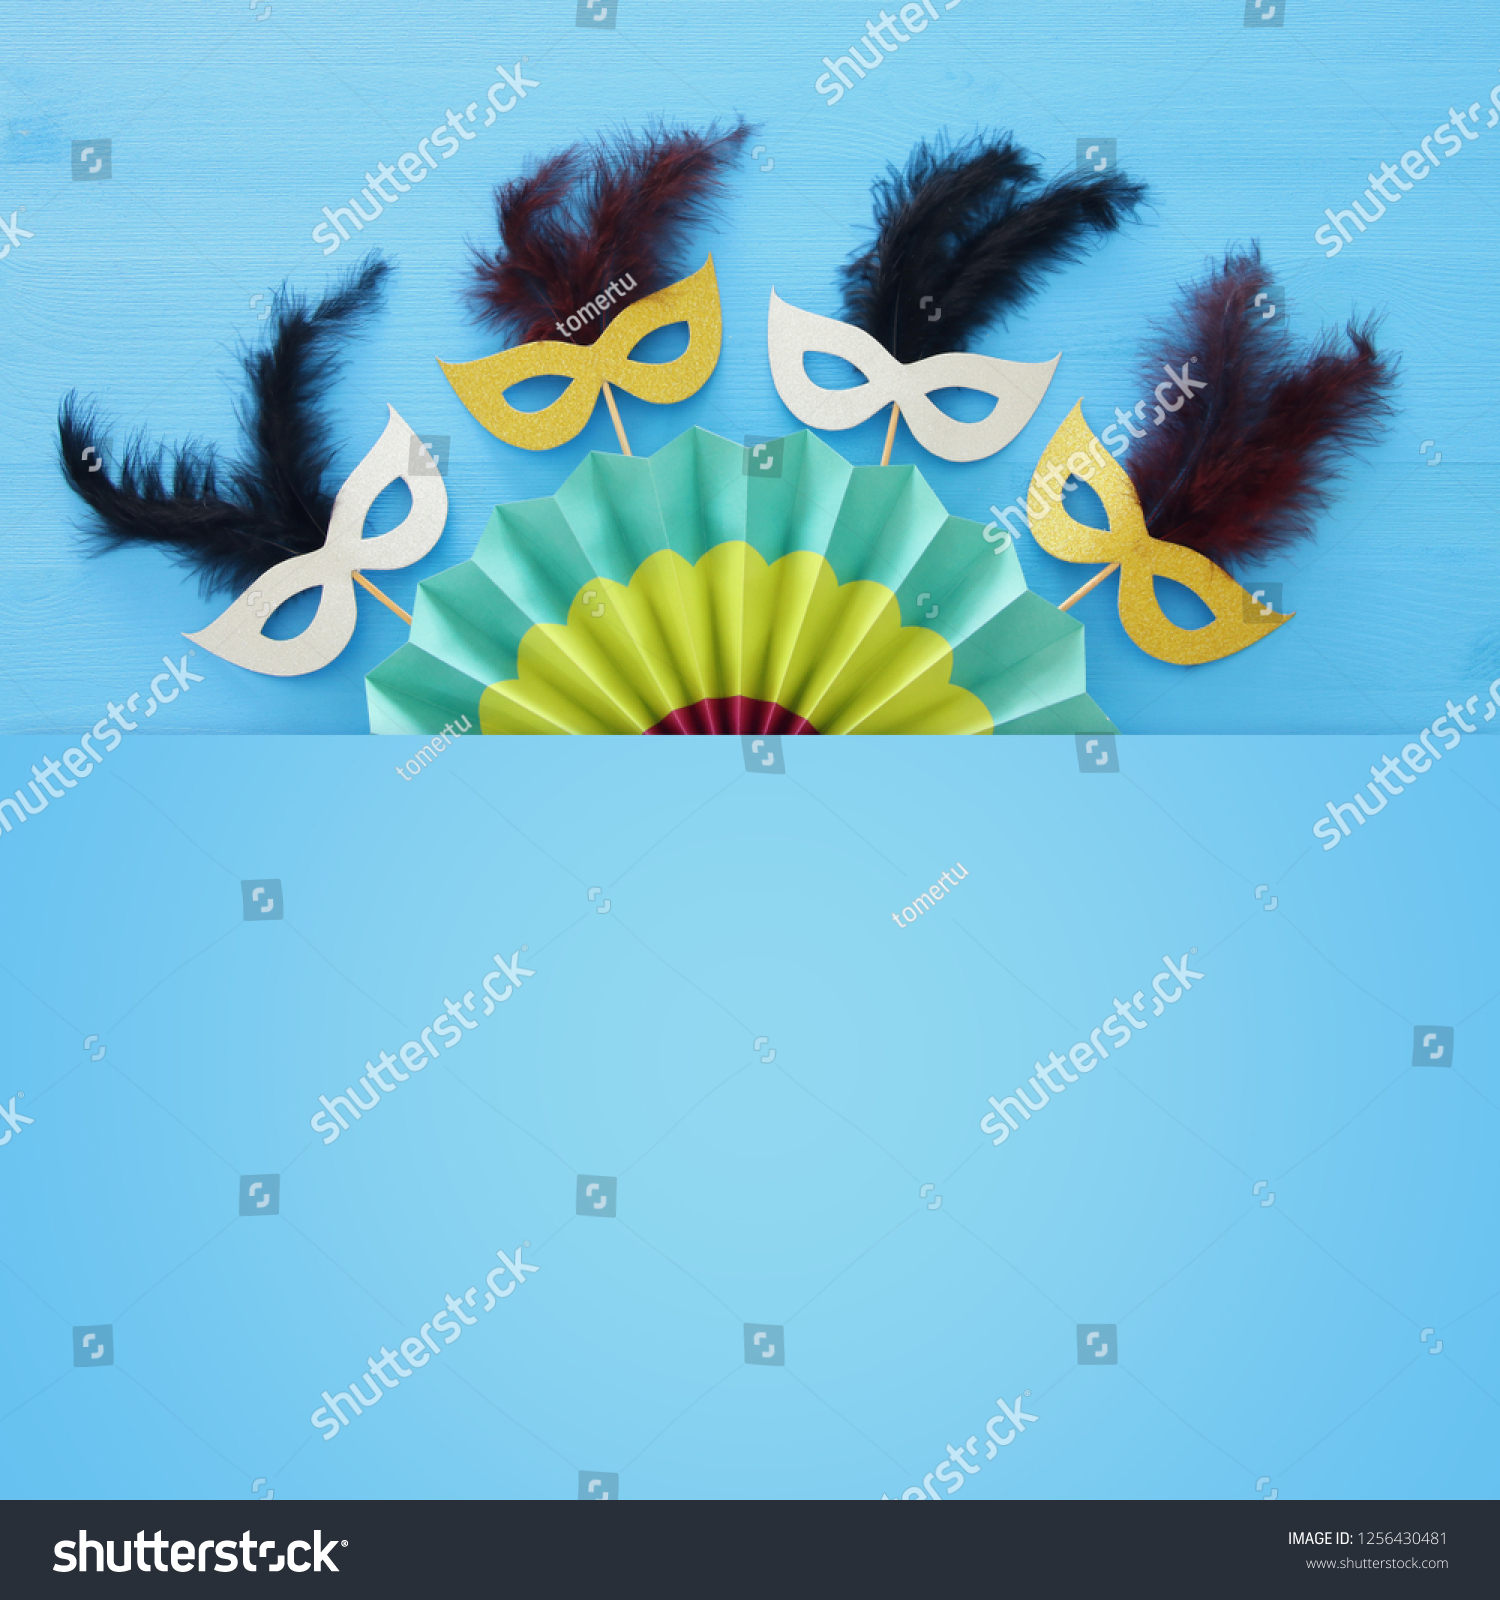 carnival party celebration concept with masks and colorful fan over blue wooden background. Top view #1256430481